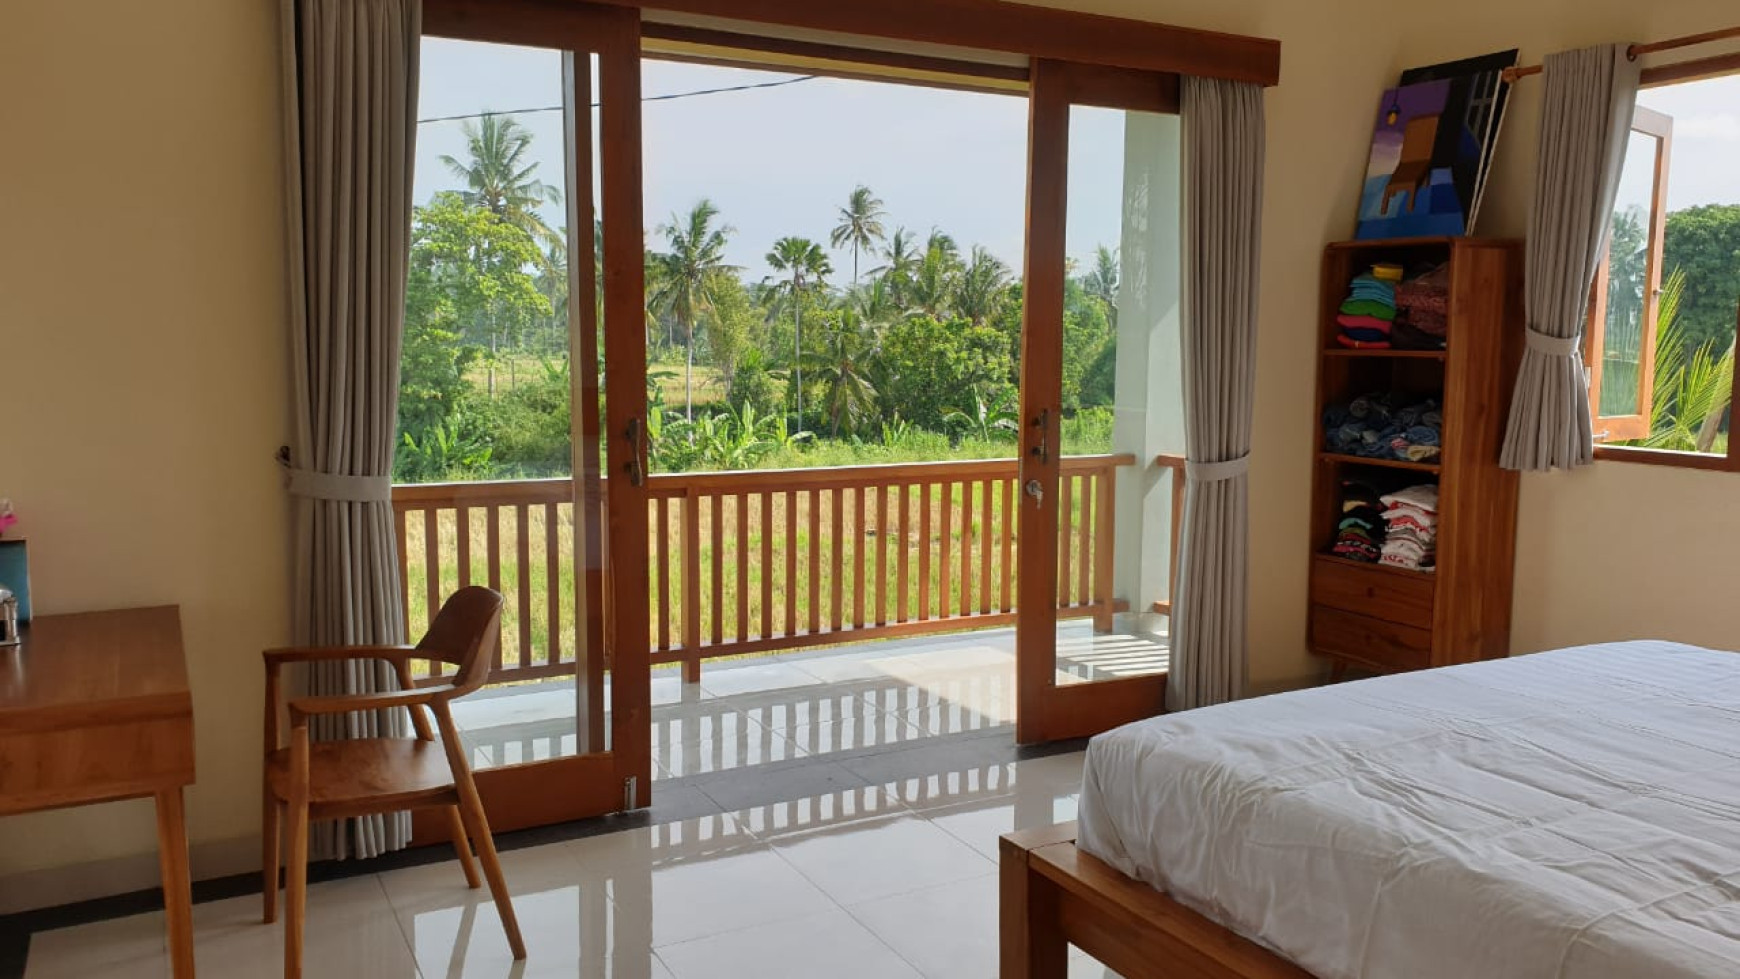 2 Bedroom Leasehold Villa with Amazing Rice Field View for Sale 15 Minutes from Ubud Center